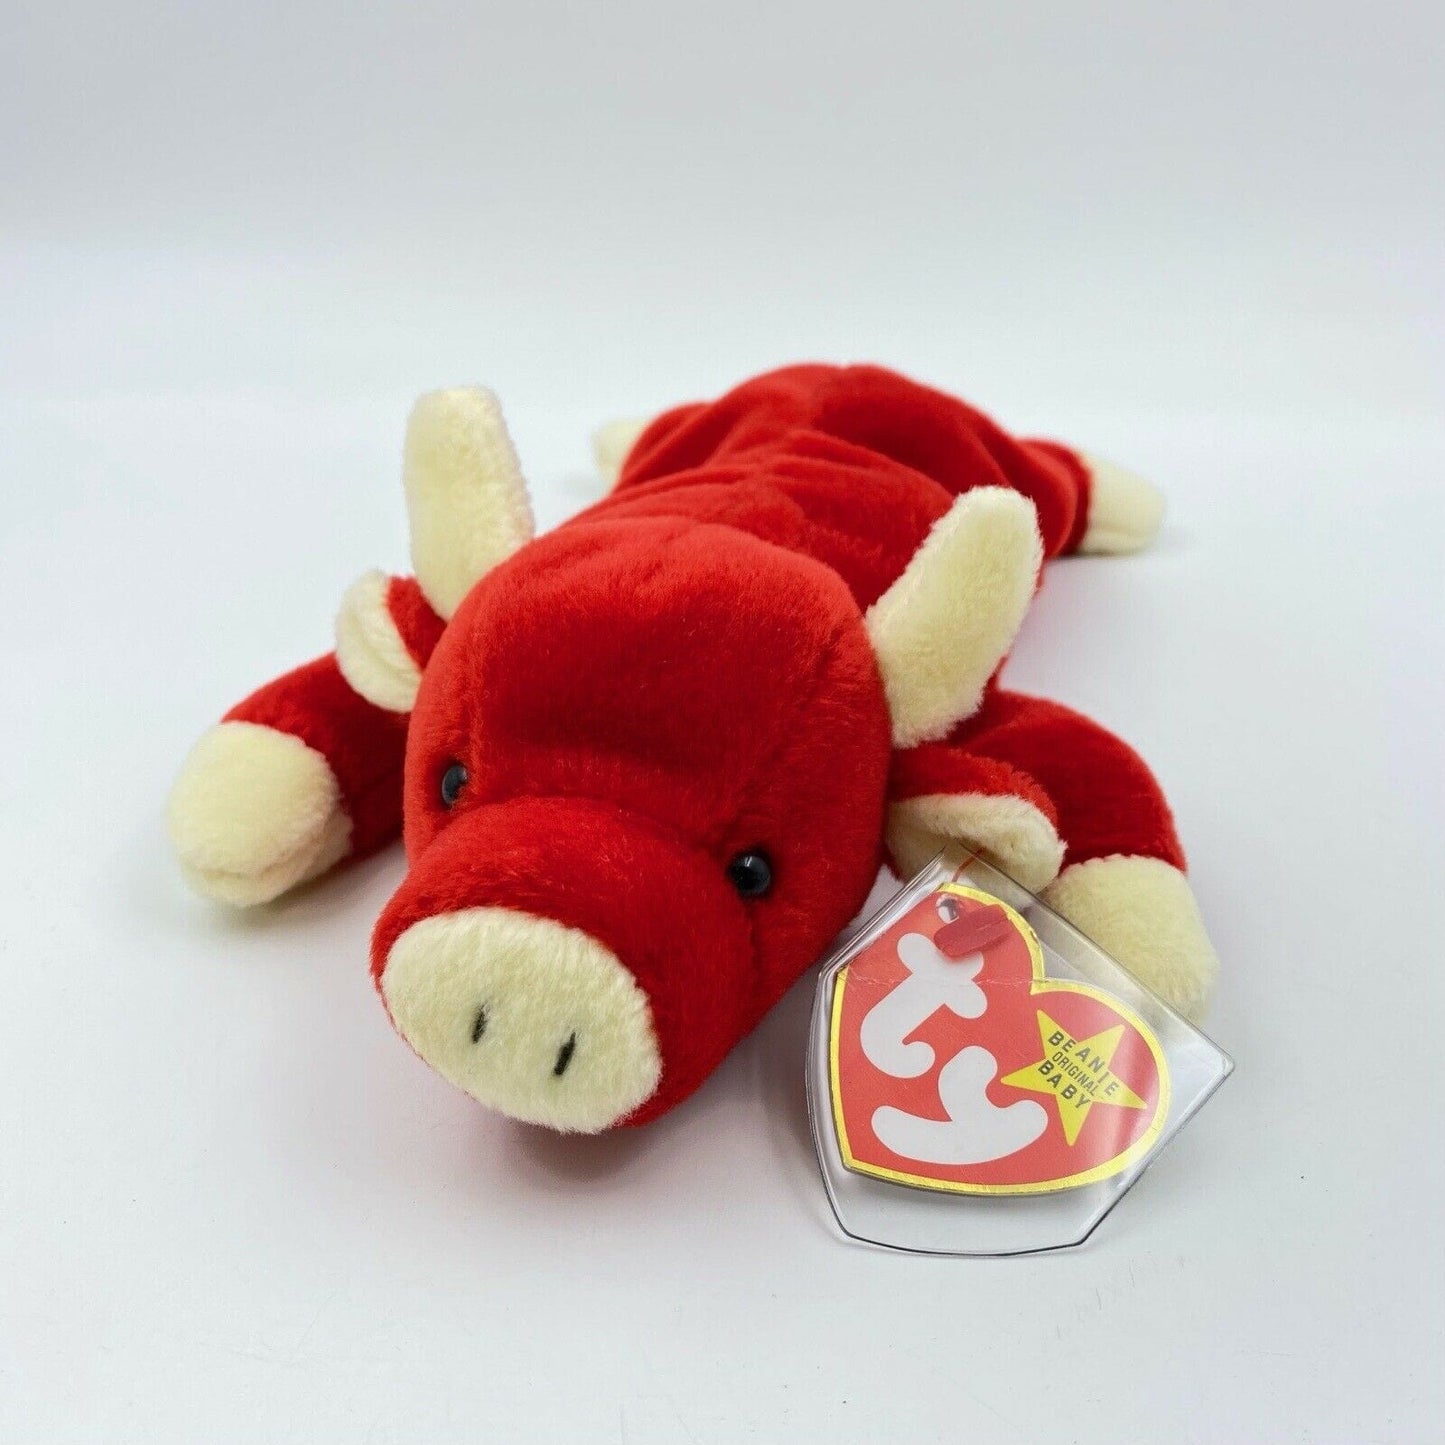 Ty Original Beanie Babies “Snort” The Bull 1995 EXCELLENT Condition - Tag Errors